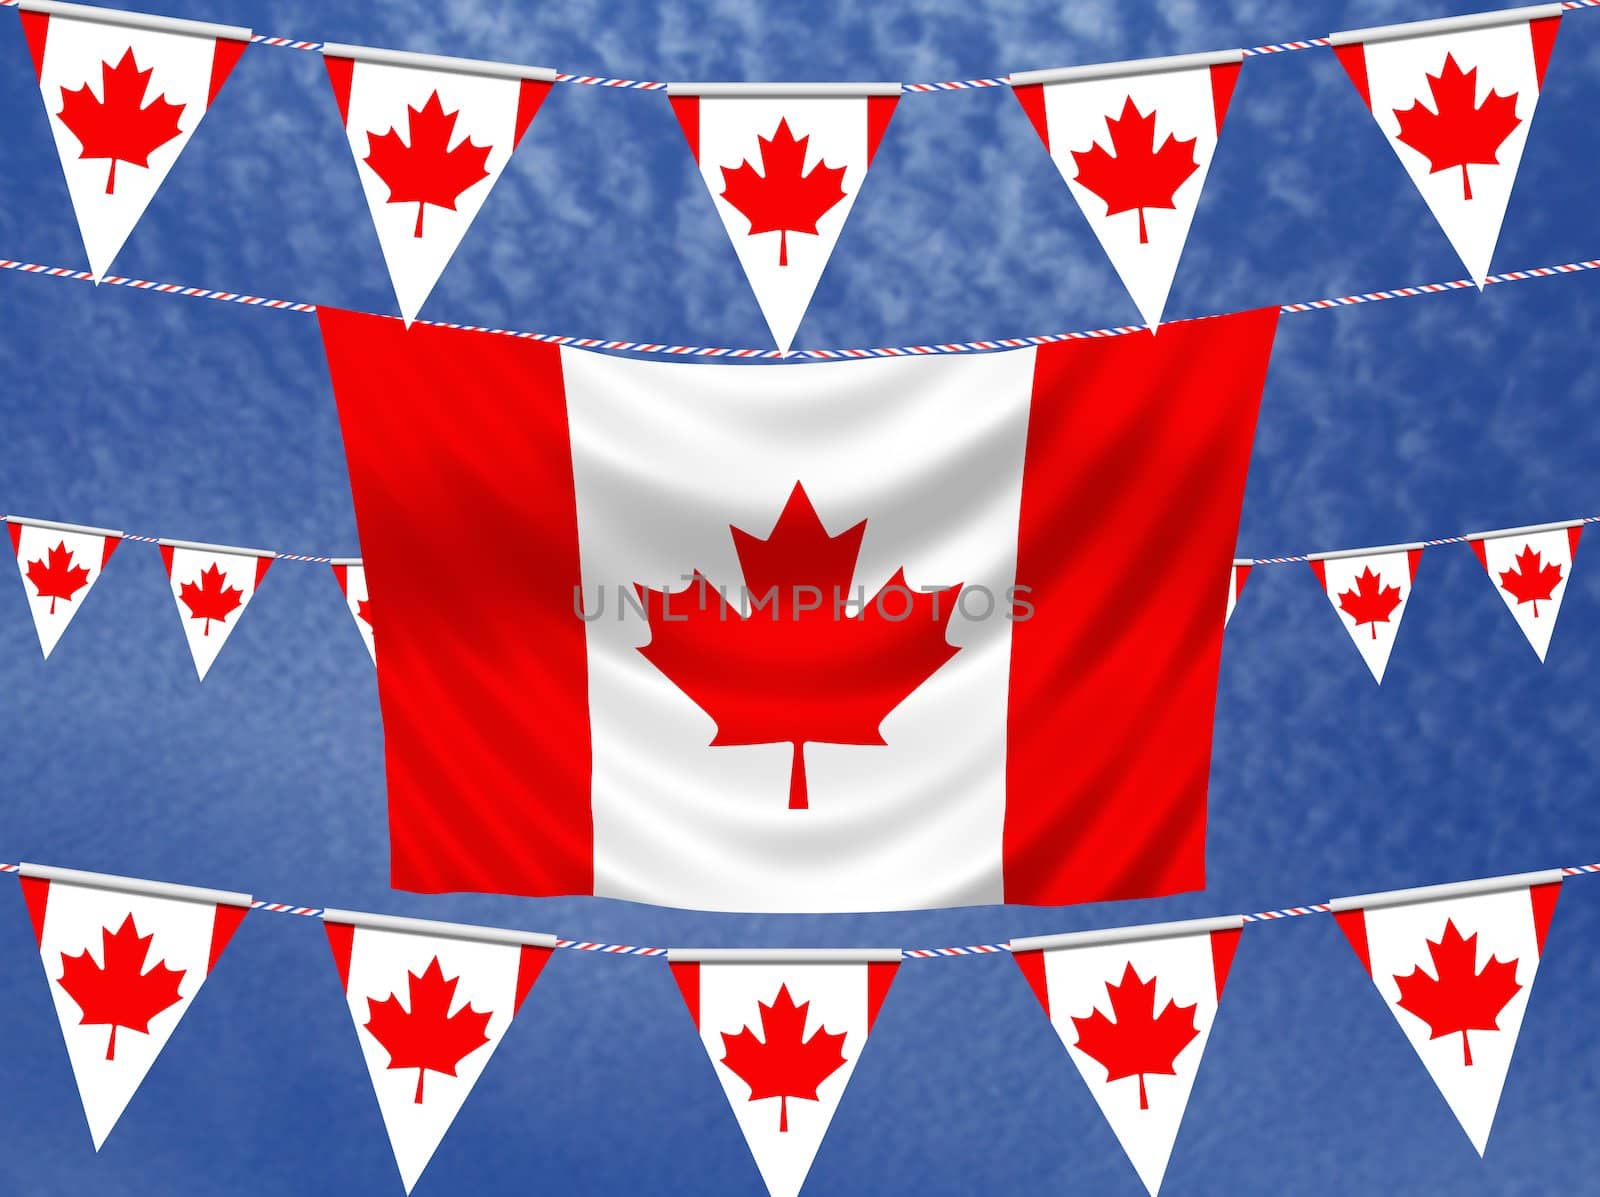 Illustration of Hanging Canadian banners and flag